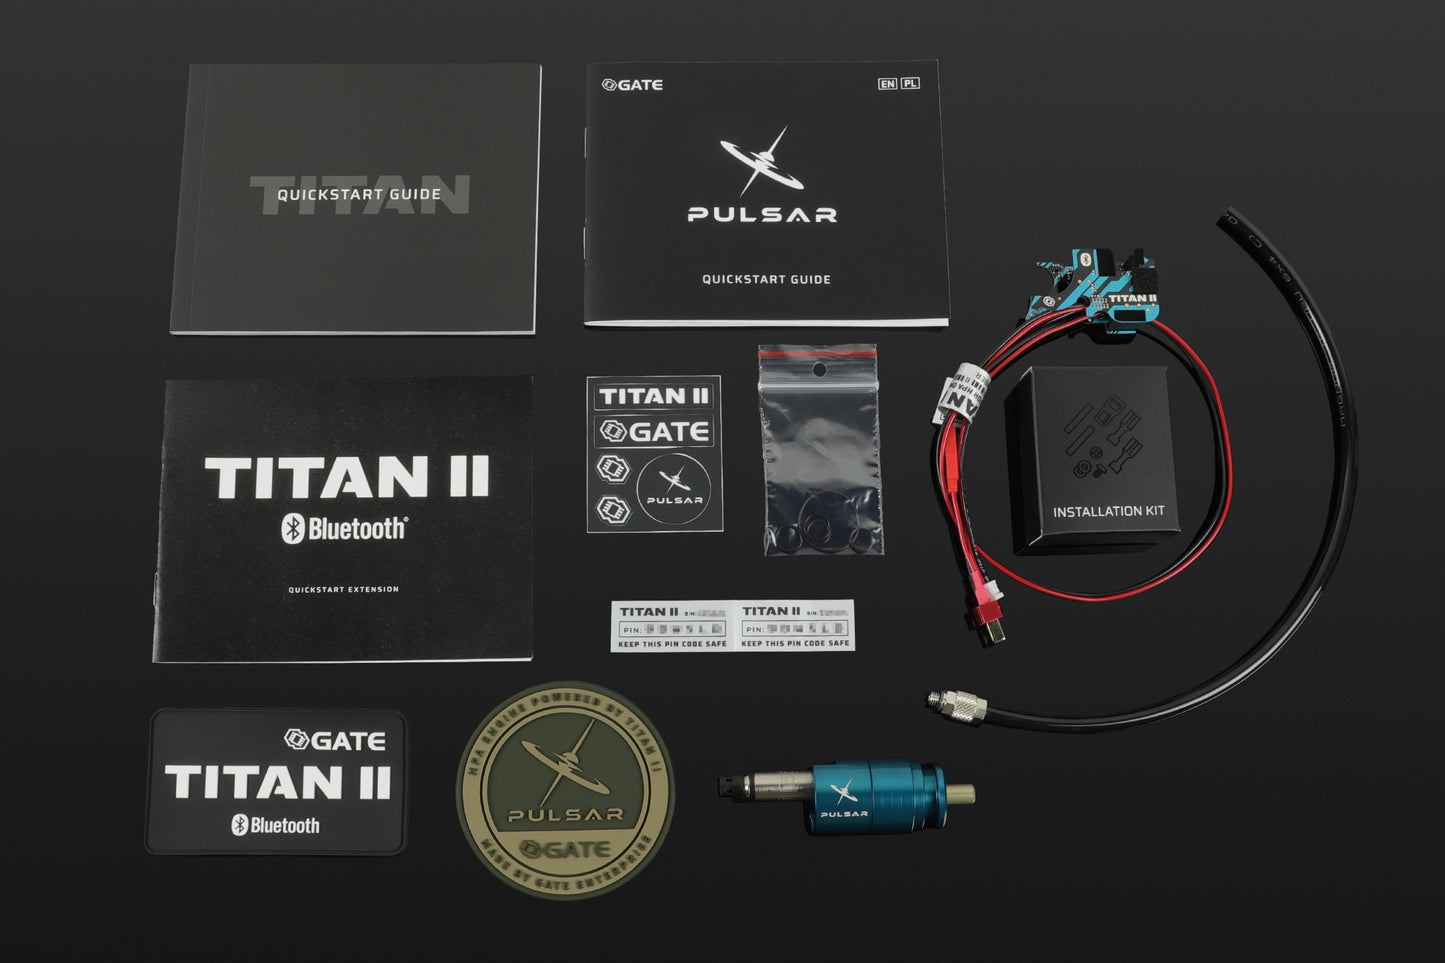 PULSAR S Single Solenoid HPA Engine set with TITAN II Bluetooth® EXPERT for V2 GB + free Extra Nozzle